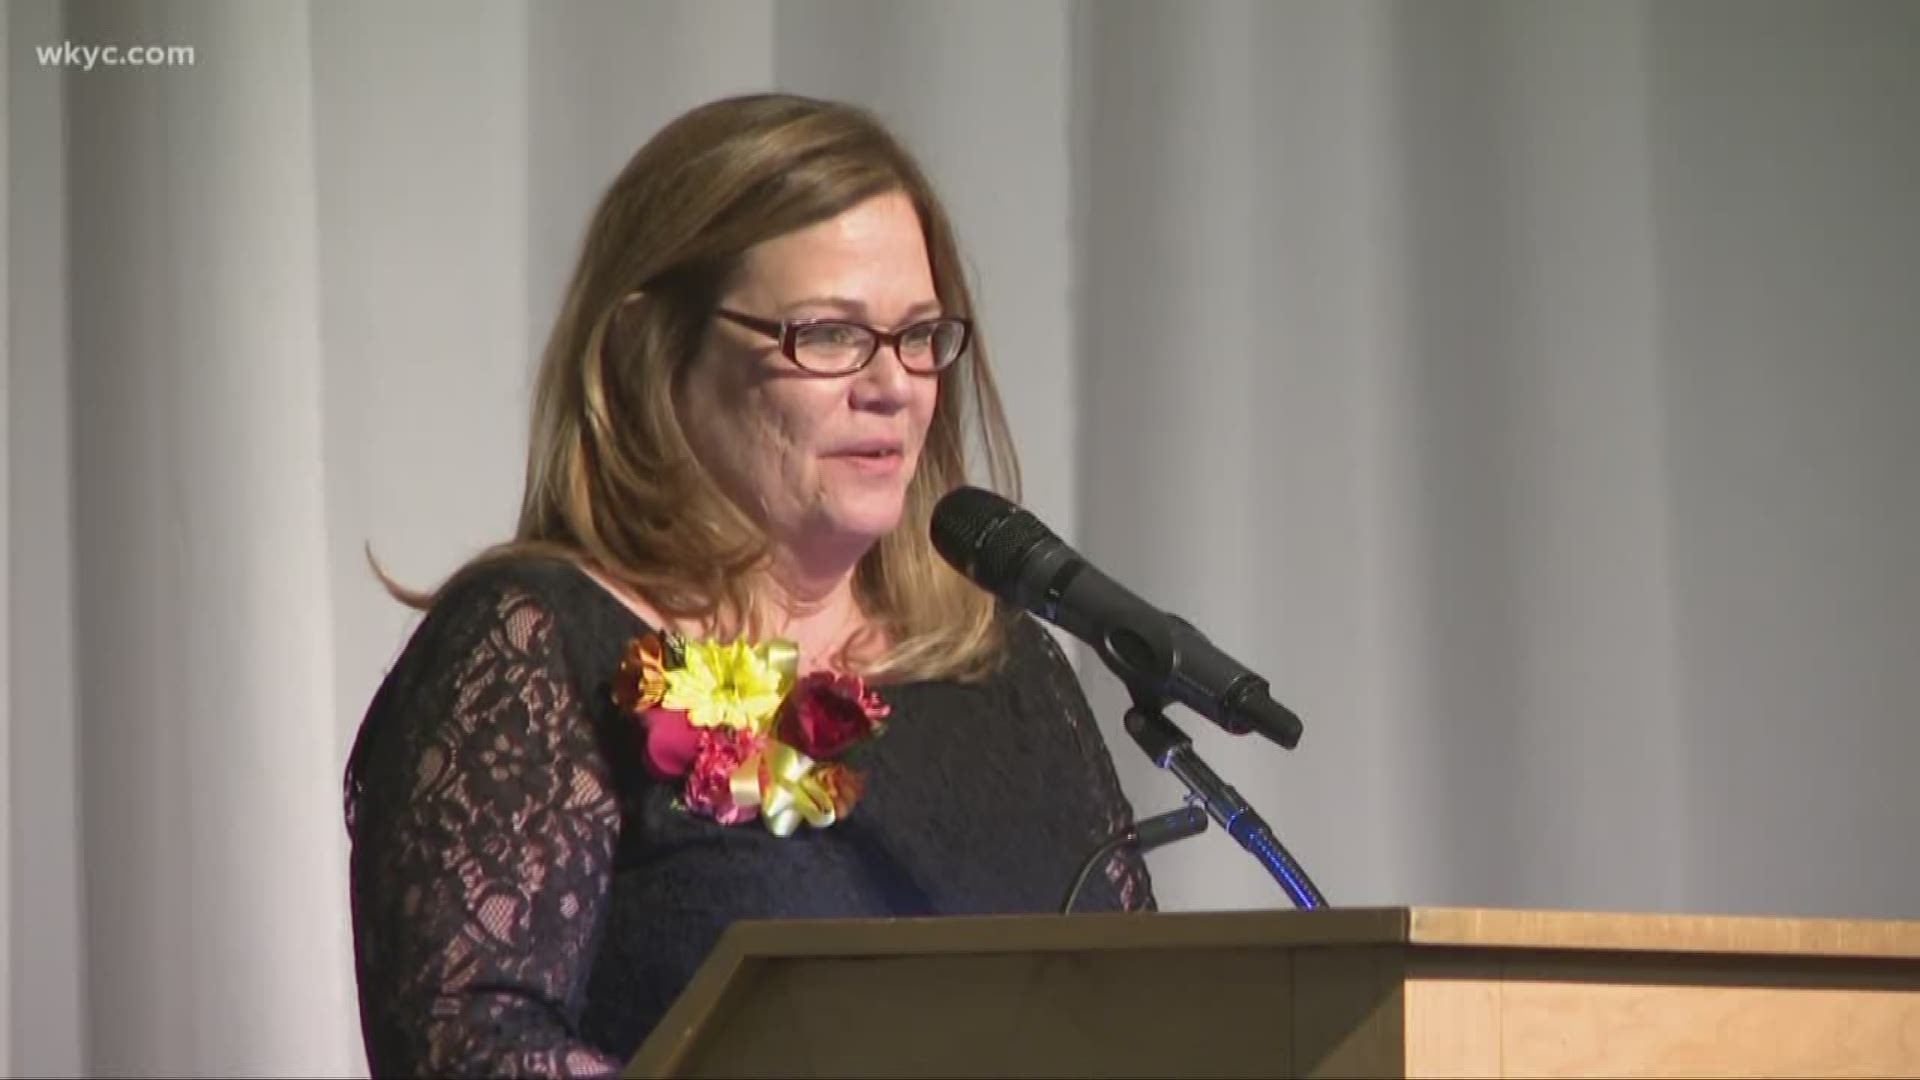 For more than 30 years, Lisa Lowry has served as an assignment editor at 3News. Thursday, she was inducted into the Press Club of Cleveland Hall of Fame.